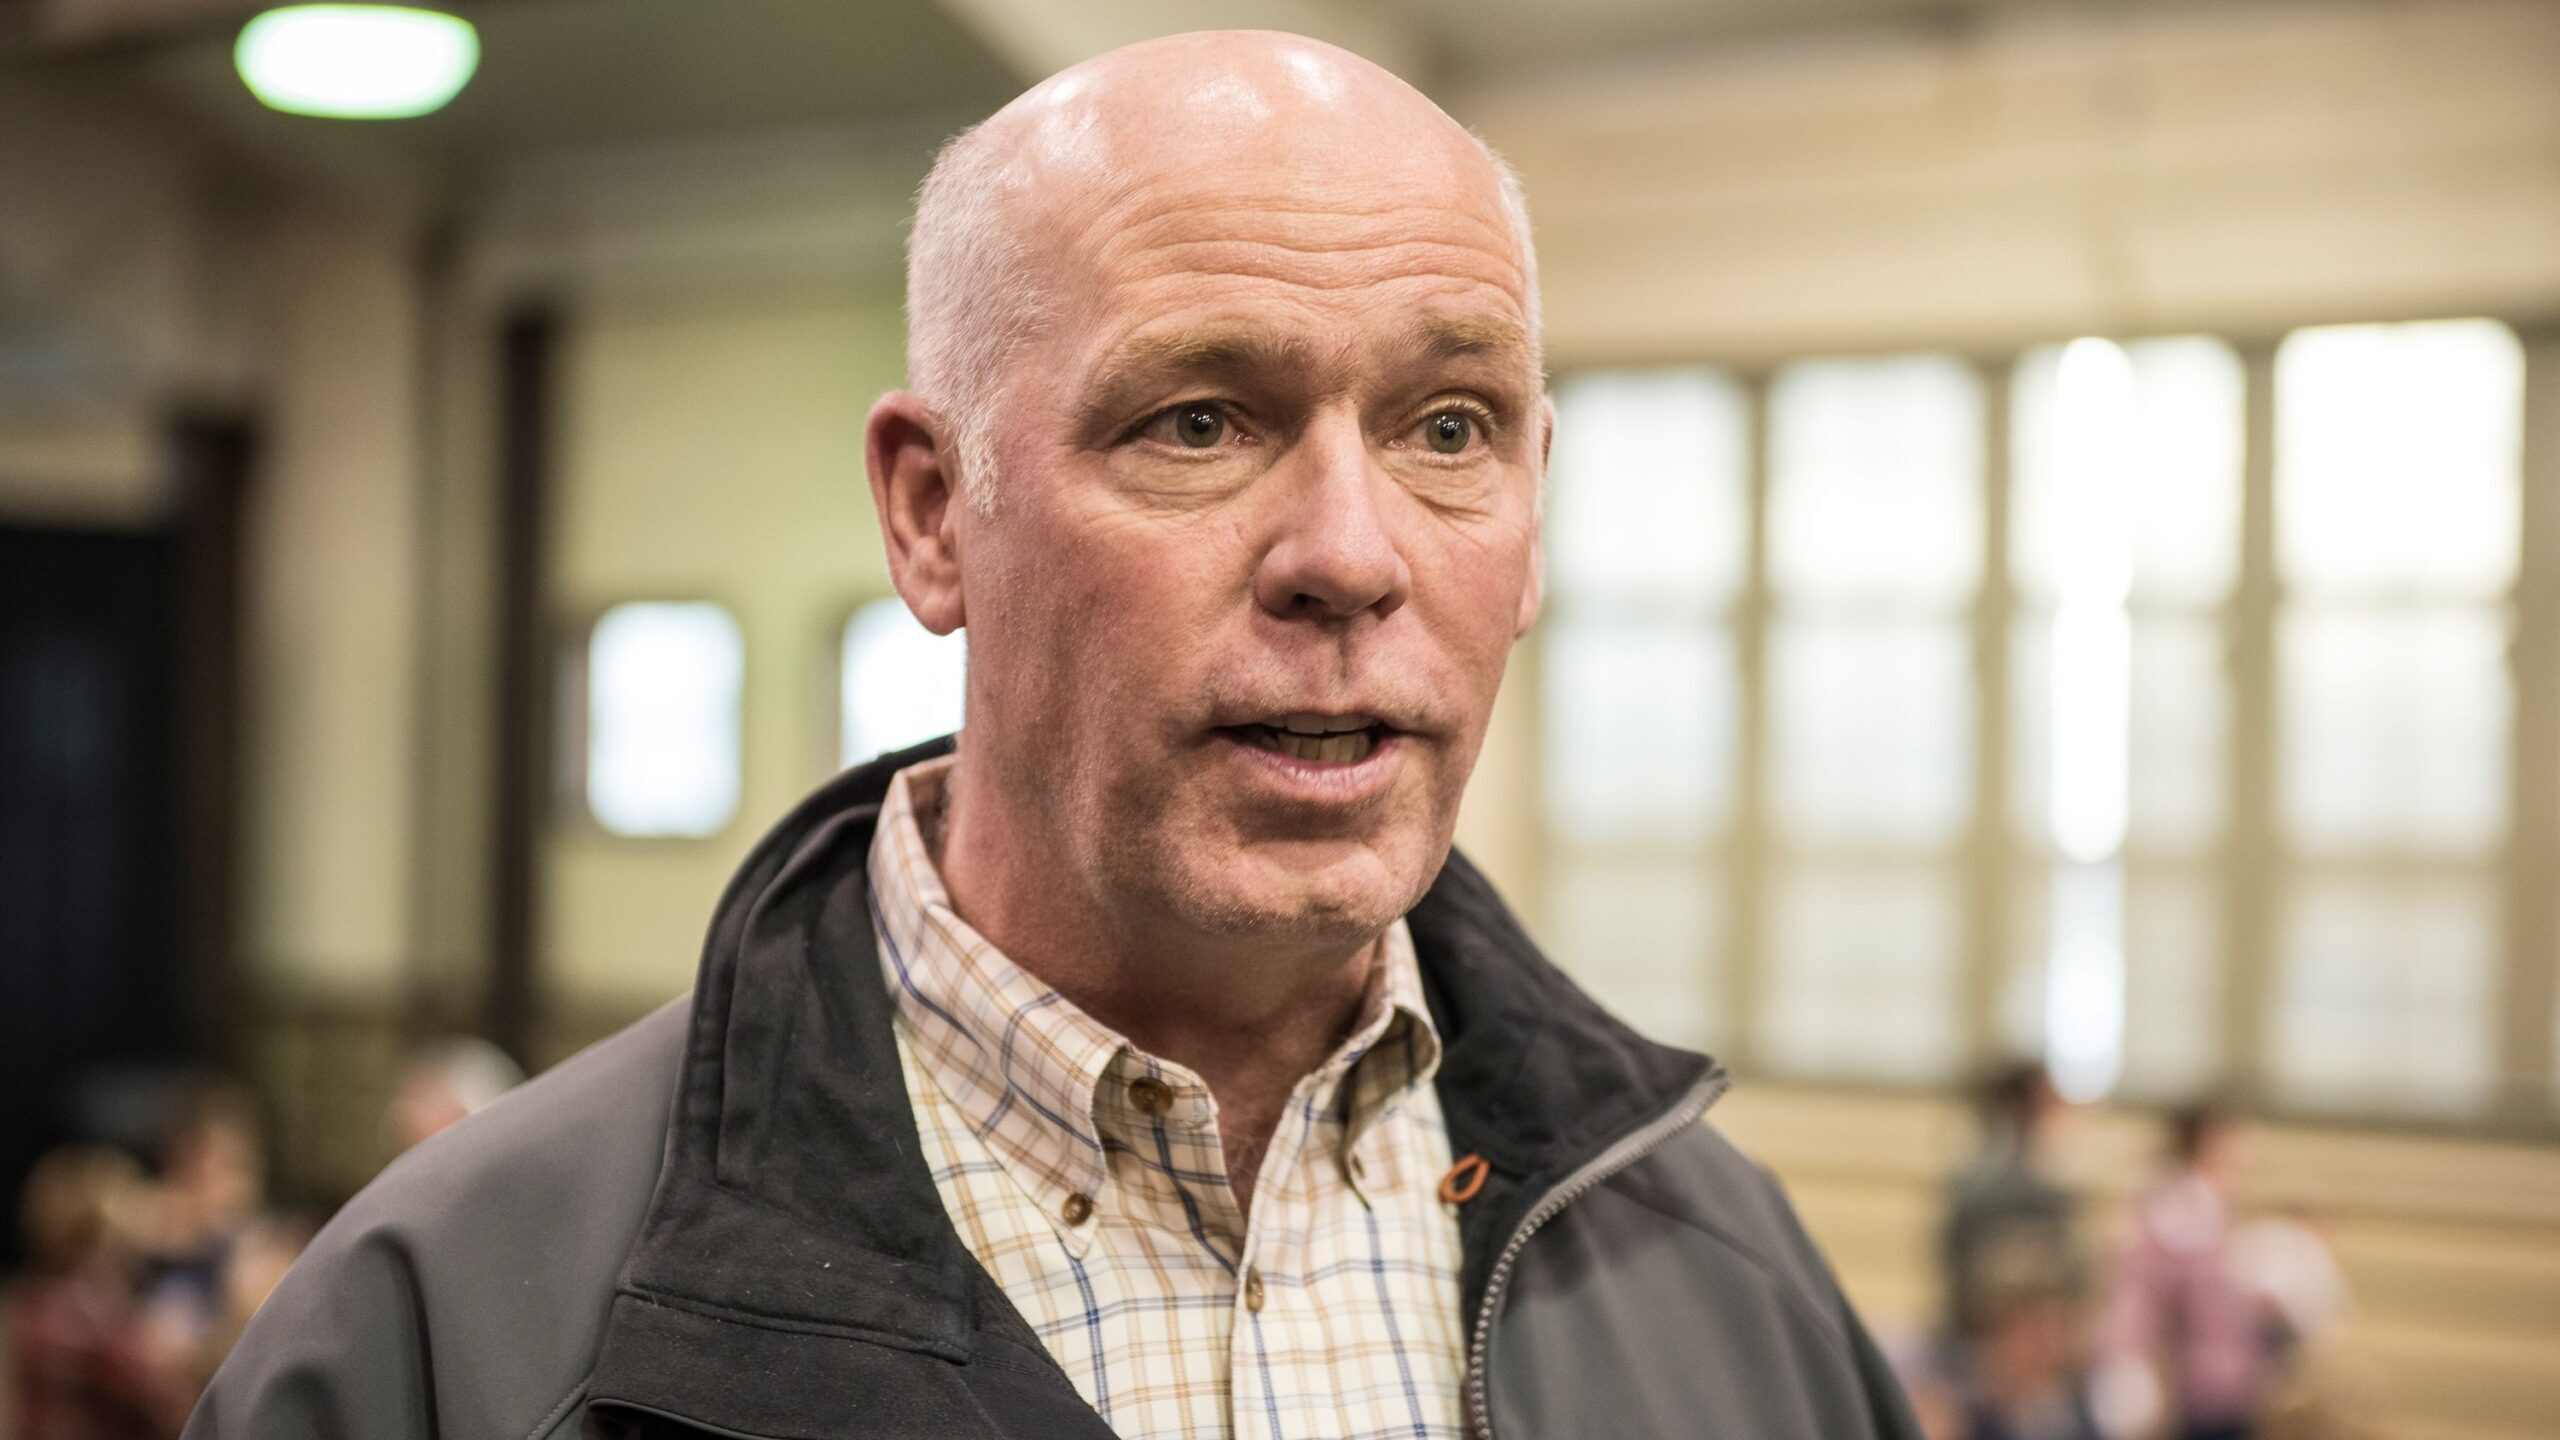 Montana Gov. Greg Gianforte, seen here in April 2017, tweeted on May 17 that he has banned TikTok i...